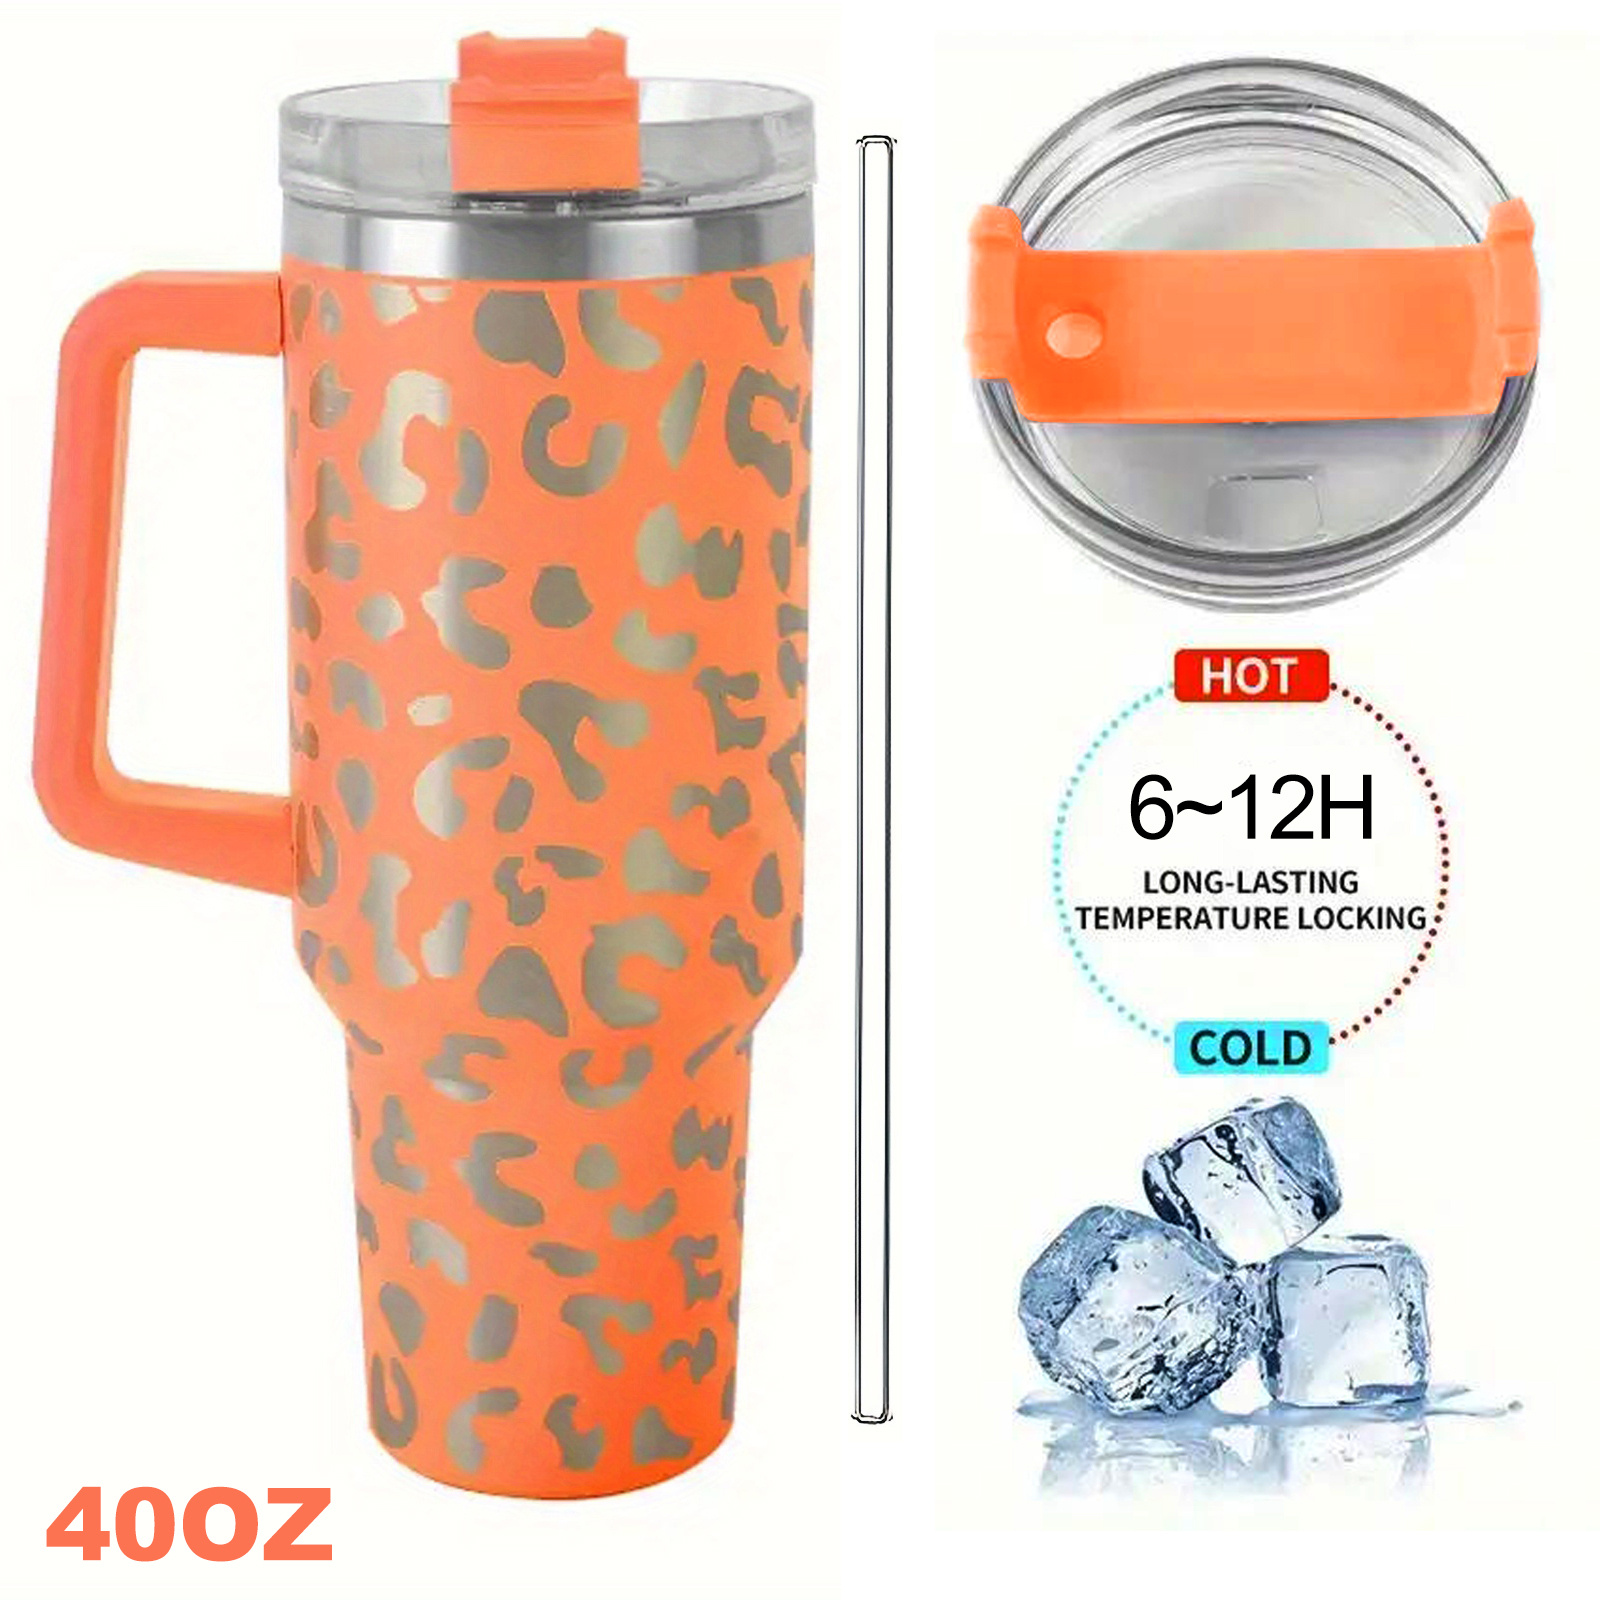 Reduce Cold1 40 oz Tumbler with Handle - Vacuum Insulated Stainless Steel Water Bottle for Home, Office or Car, Reusable Mug with Straw or Leakproof